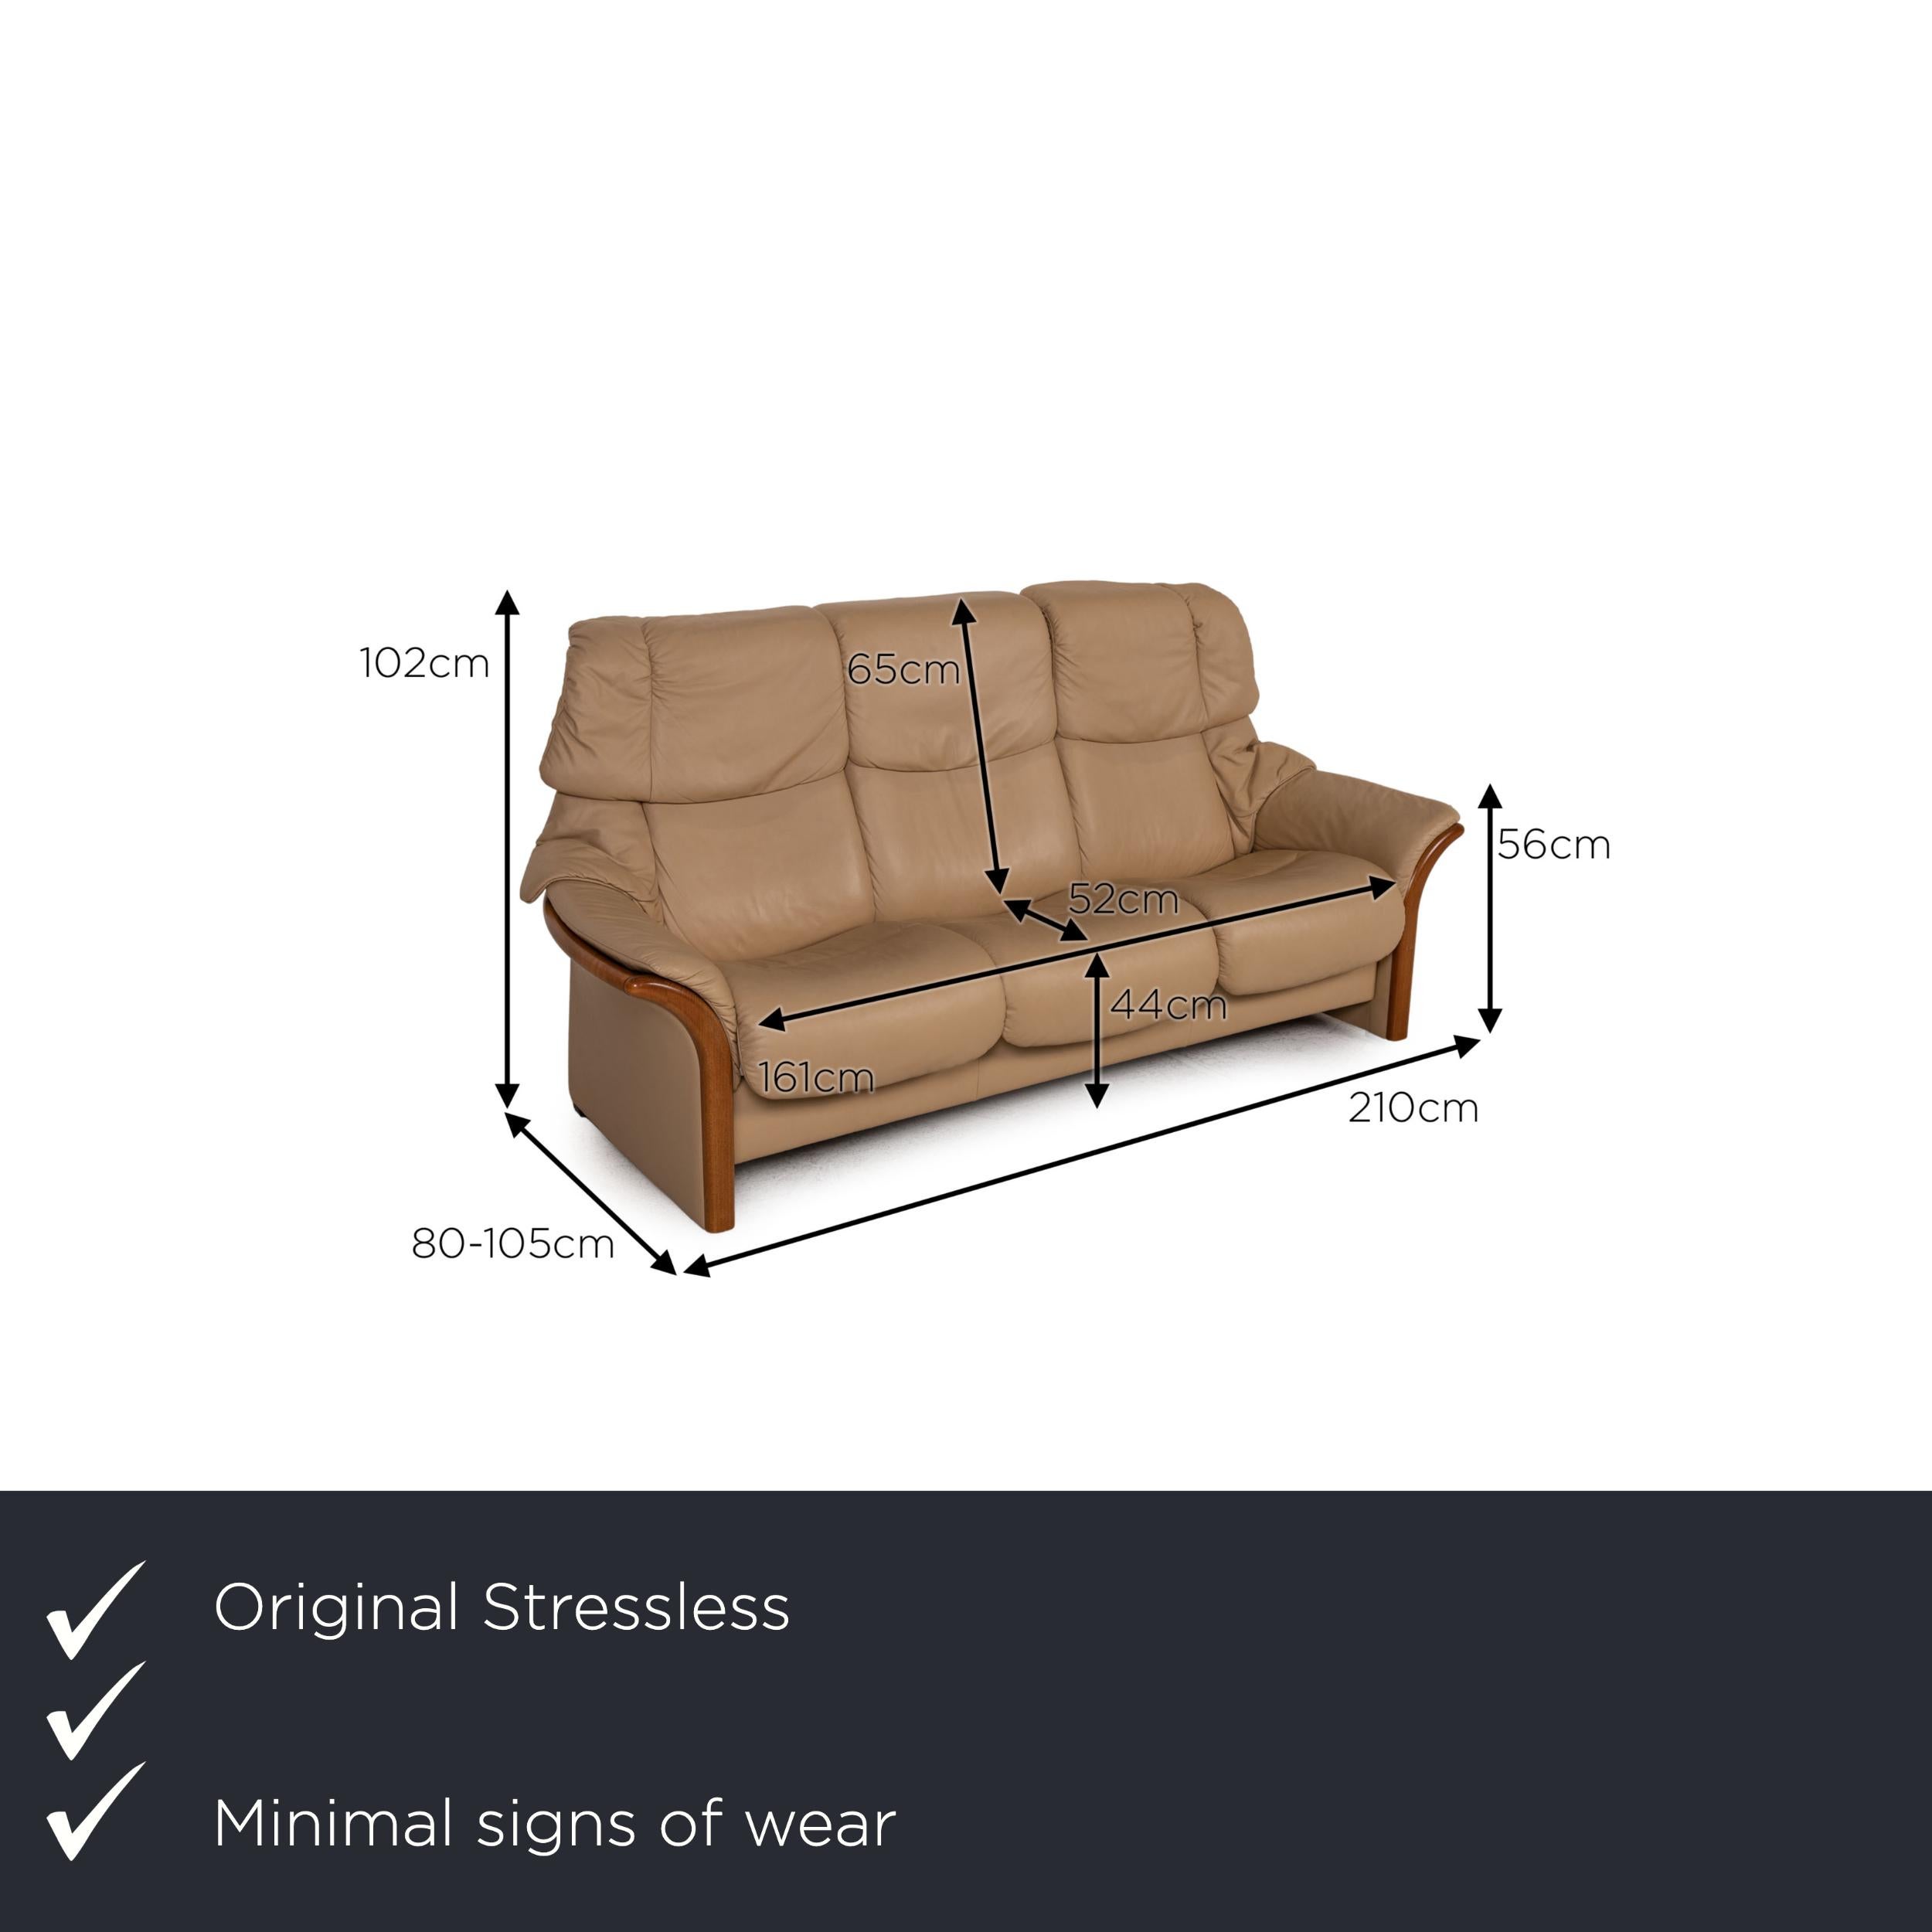 We present to you a Stressless Eldorado leather sofa beige three seater couch.

Product measurements in centimeters:

depth: 80
width: 210
height: 102
seat height: 44
rest height: 56
seat depth: 52
seat width: 161
back height: 65.

 